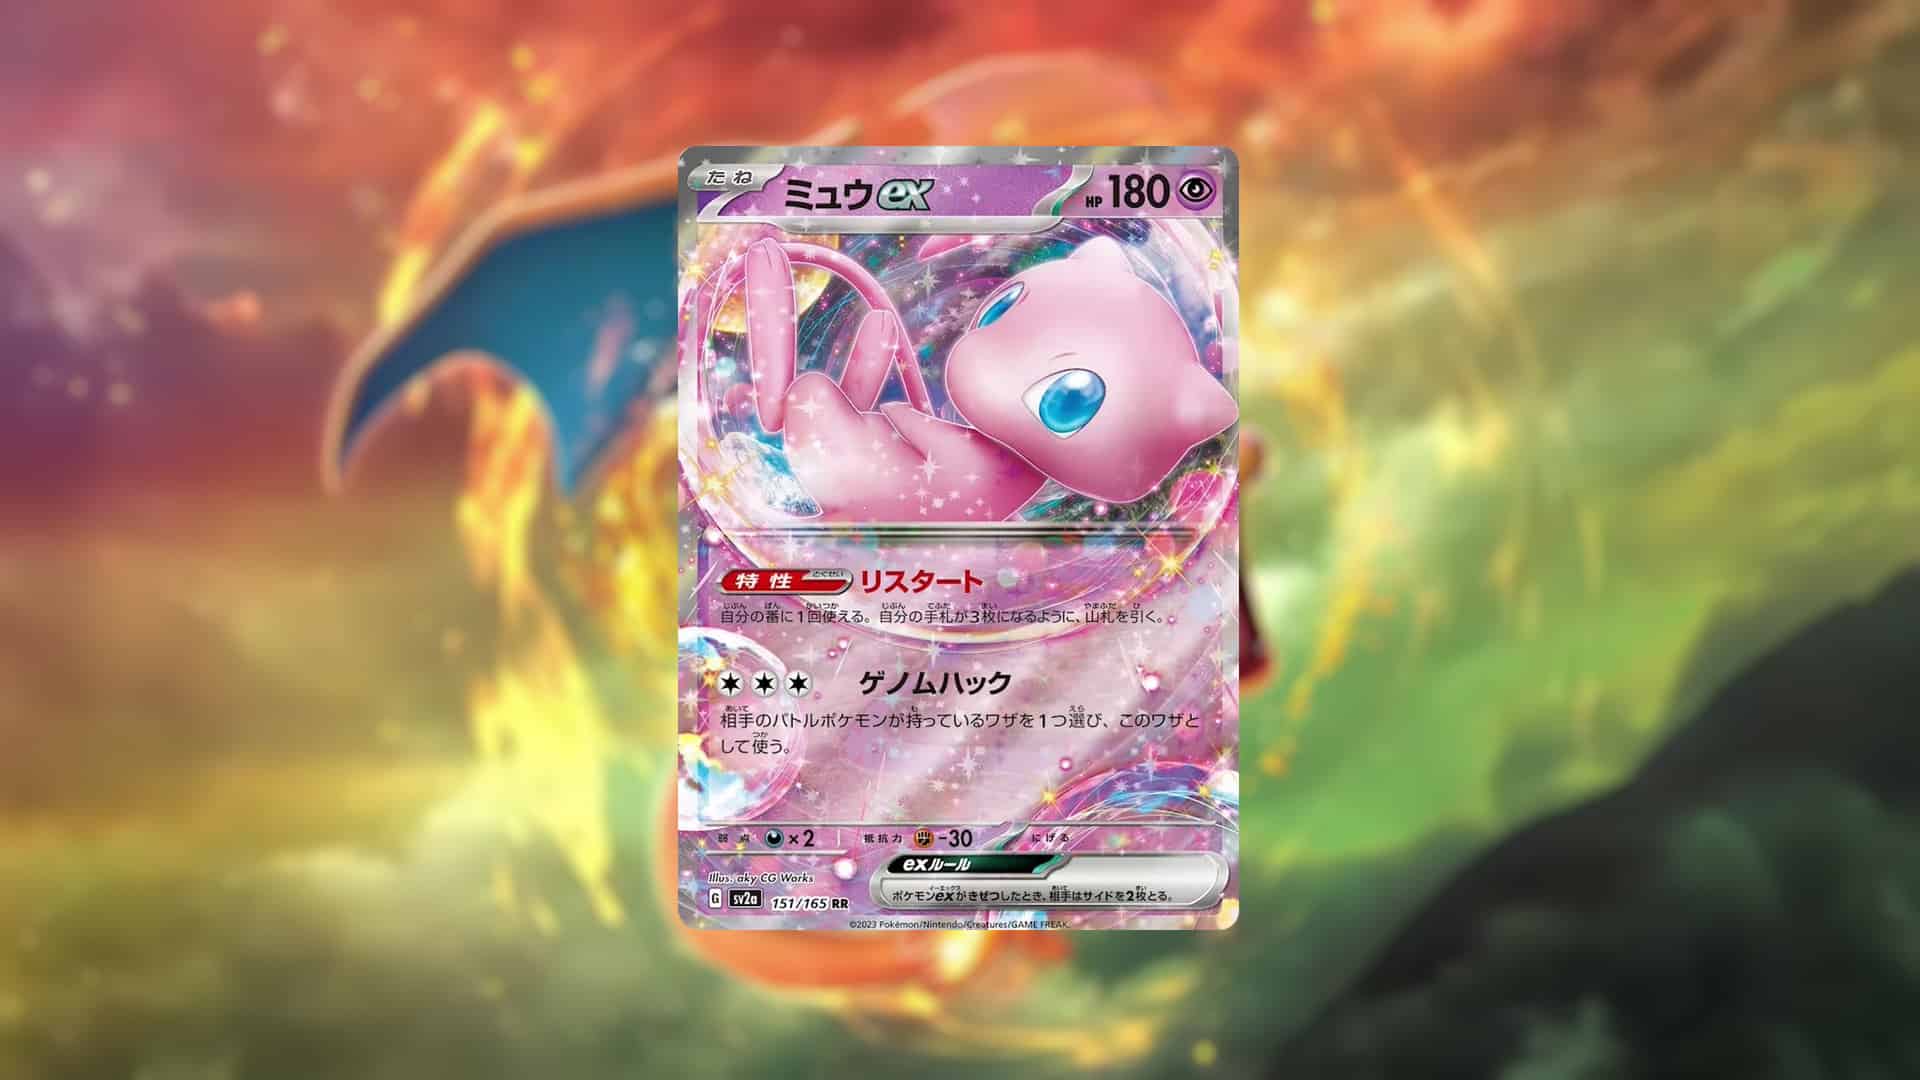 Picture of Mew EX from Pokemon 151